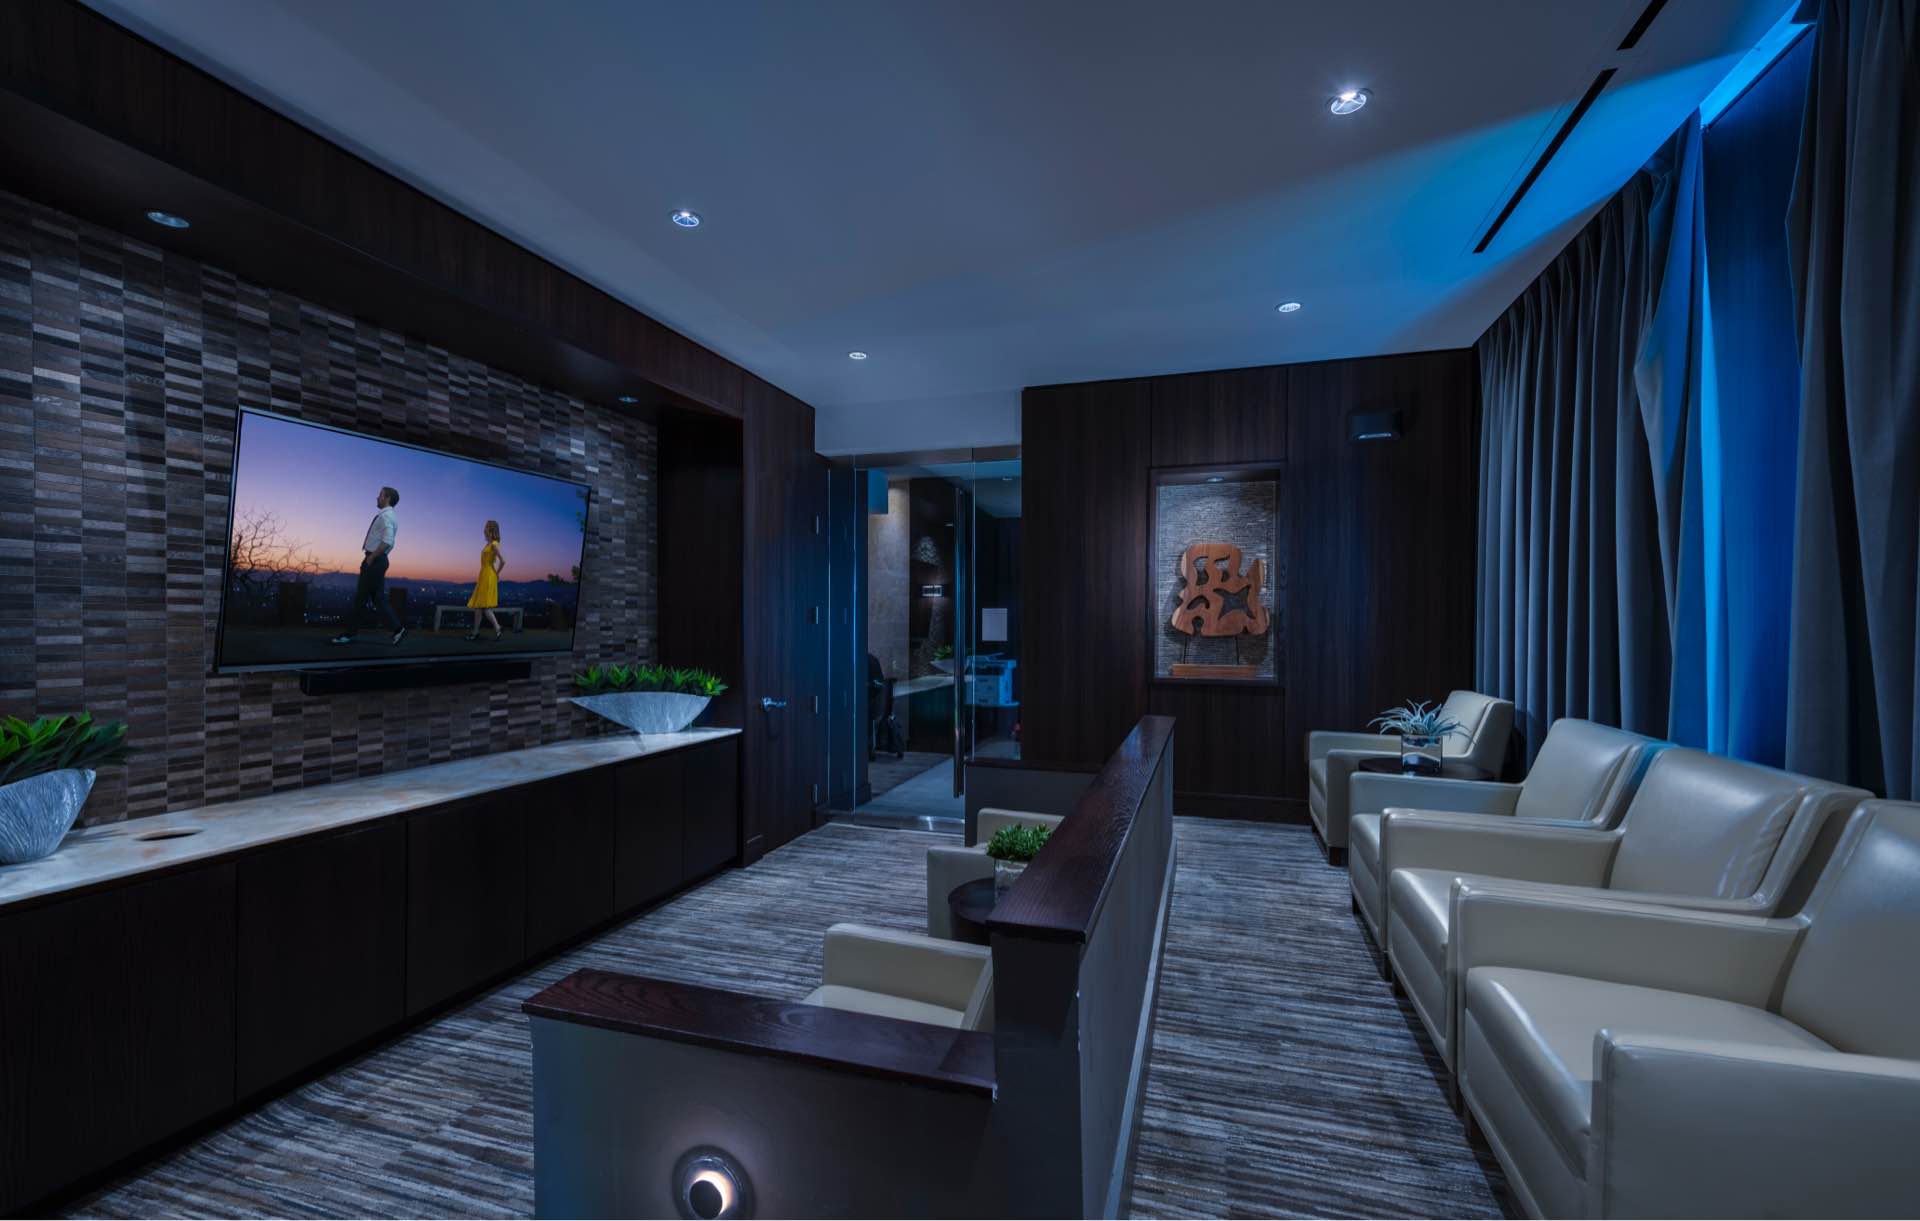 Catch a game or watch a movie in our private media room